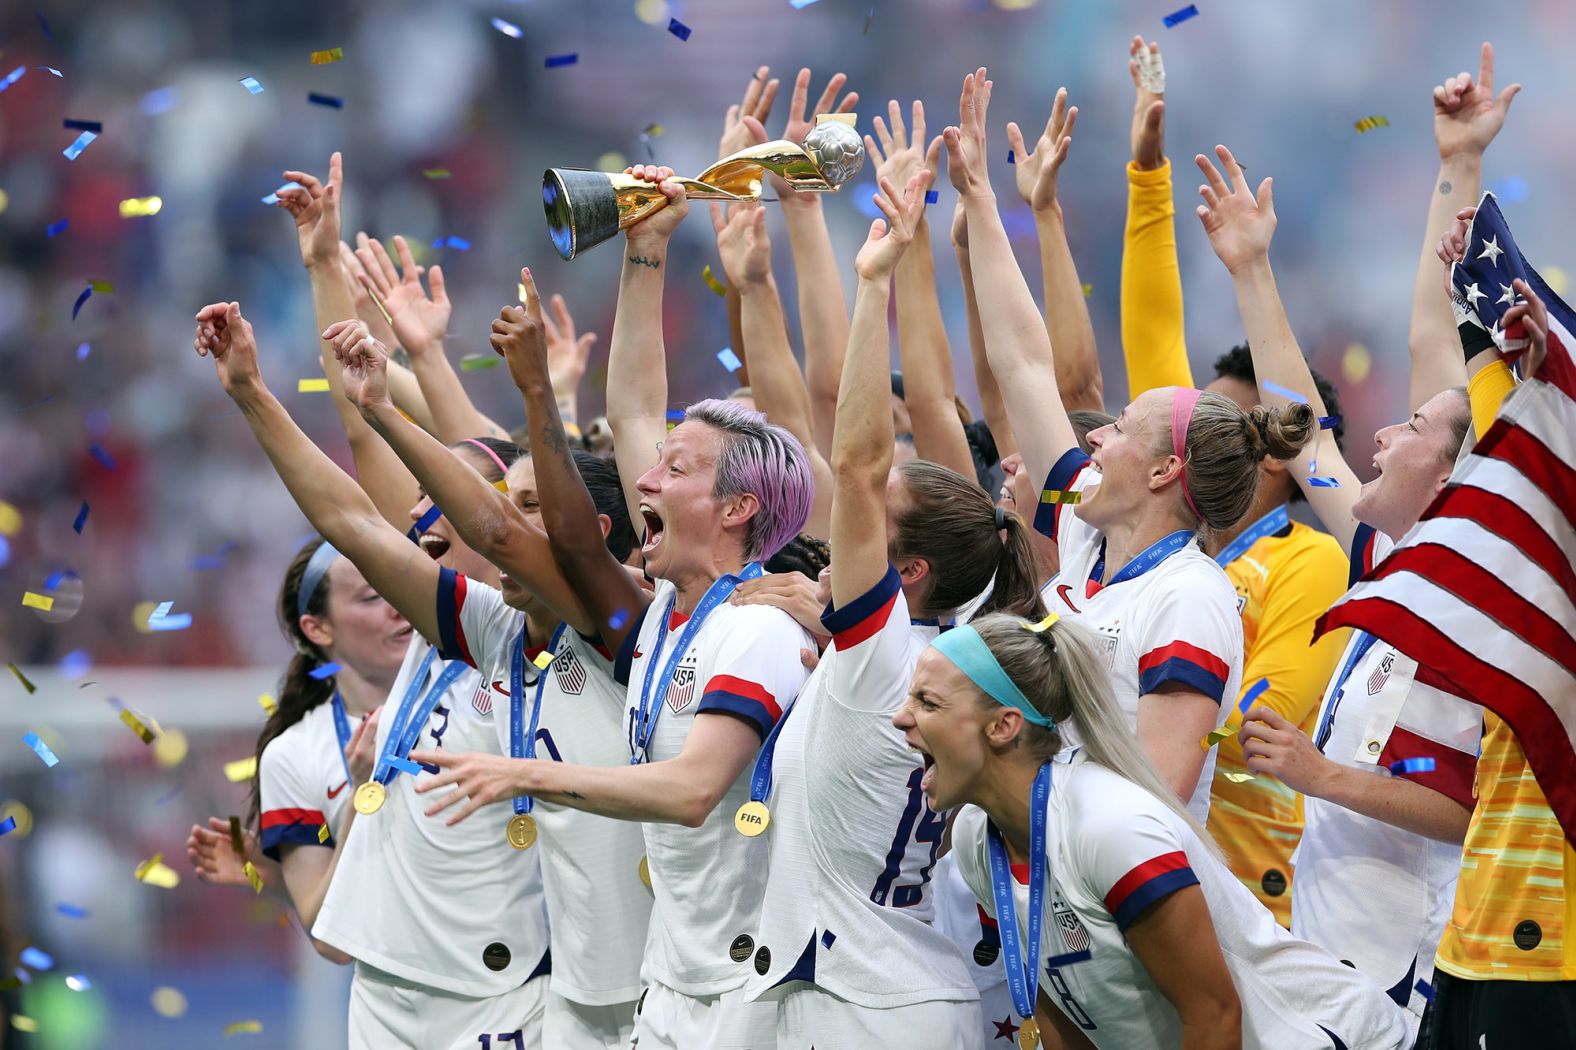 Megan Rapinoe lifts the Women's World Cup trophy after the United States women's soccer team defeated the Netherlands in the 2019 final. Off the field, 28 members of the team sued the US Soccer Federation for paying women players less than they paid men. In May 2020, a federal judge ruled that the team members did not prove wage discrimination. A spokeswoman for the players said they would appeal the decision. 